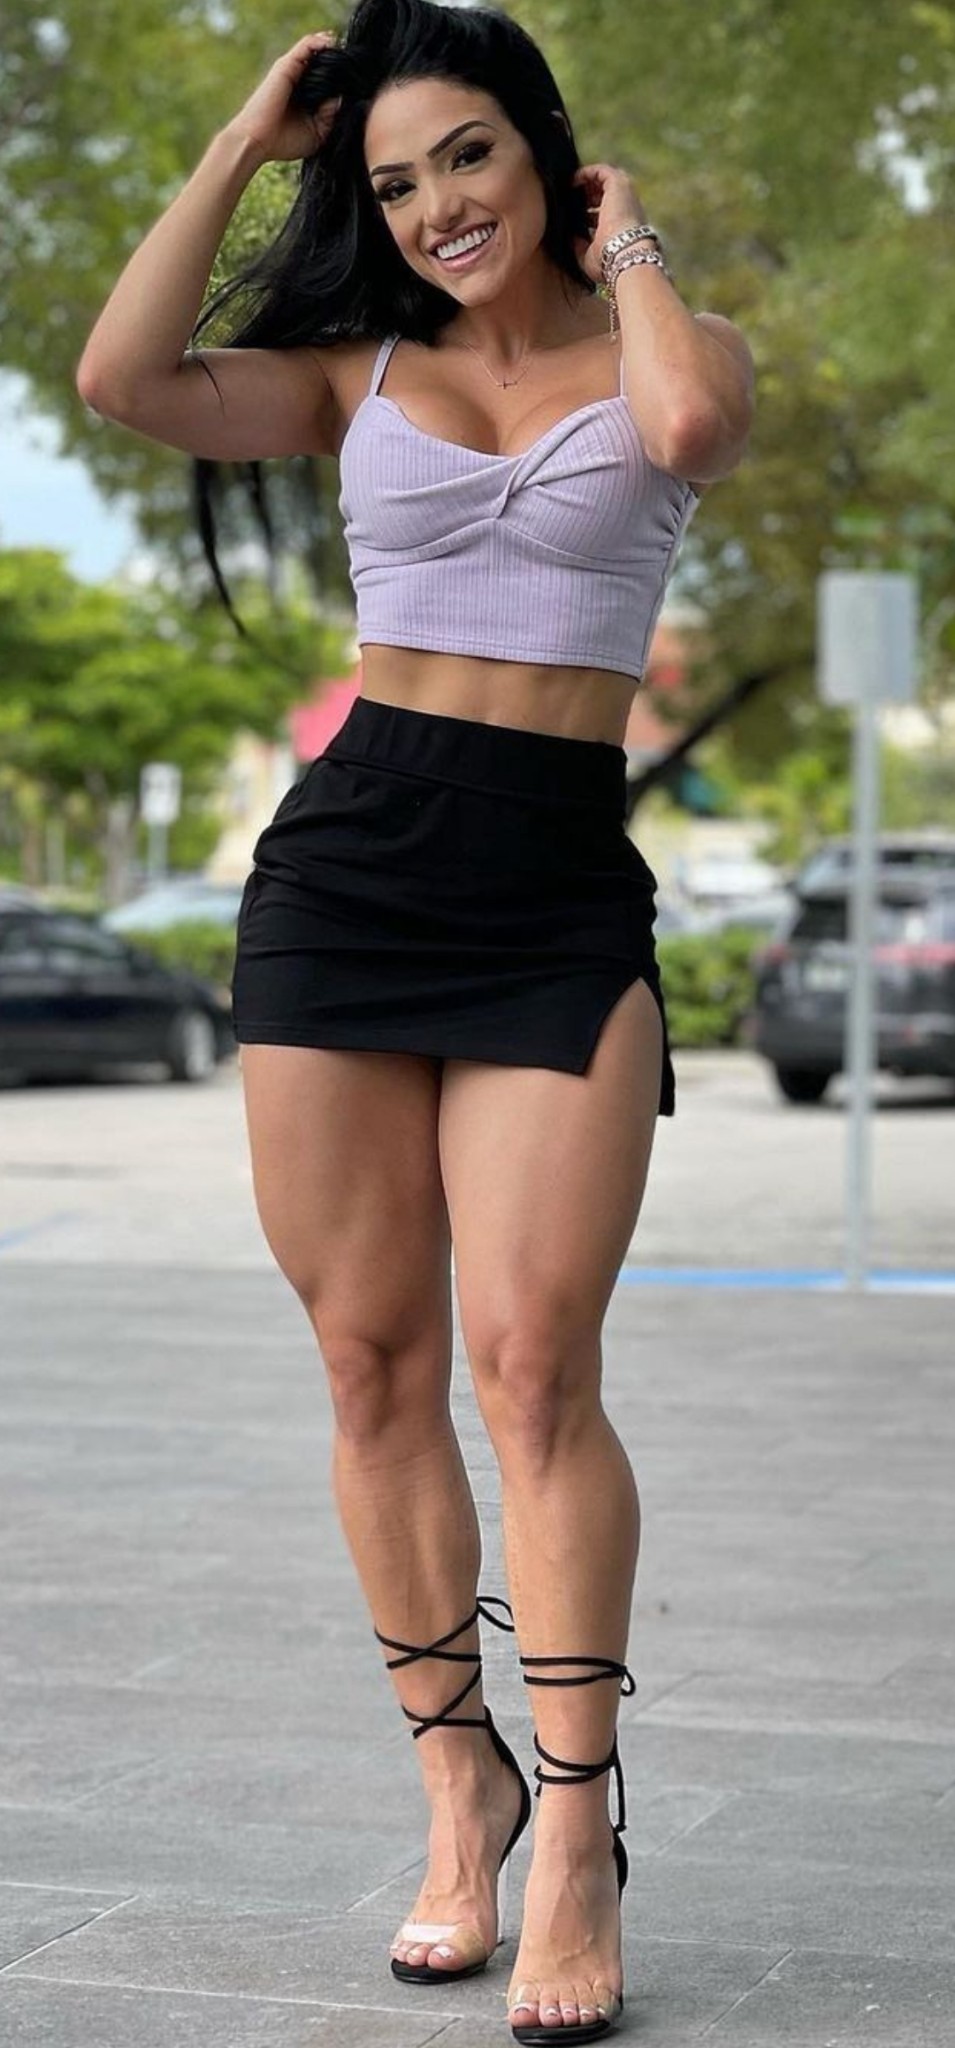 Sex girlfit55: pictures